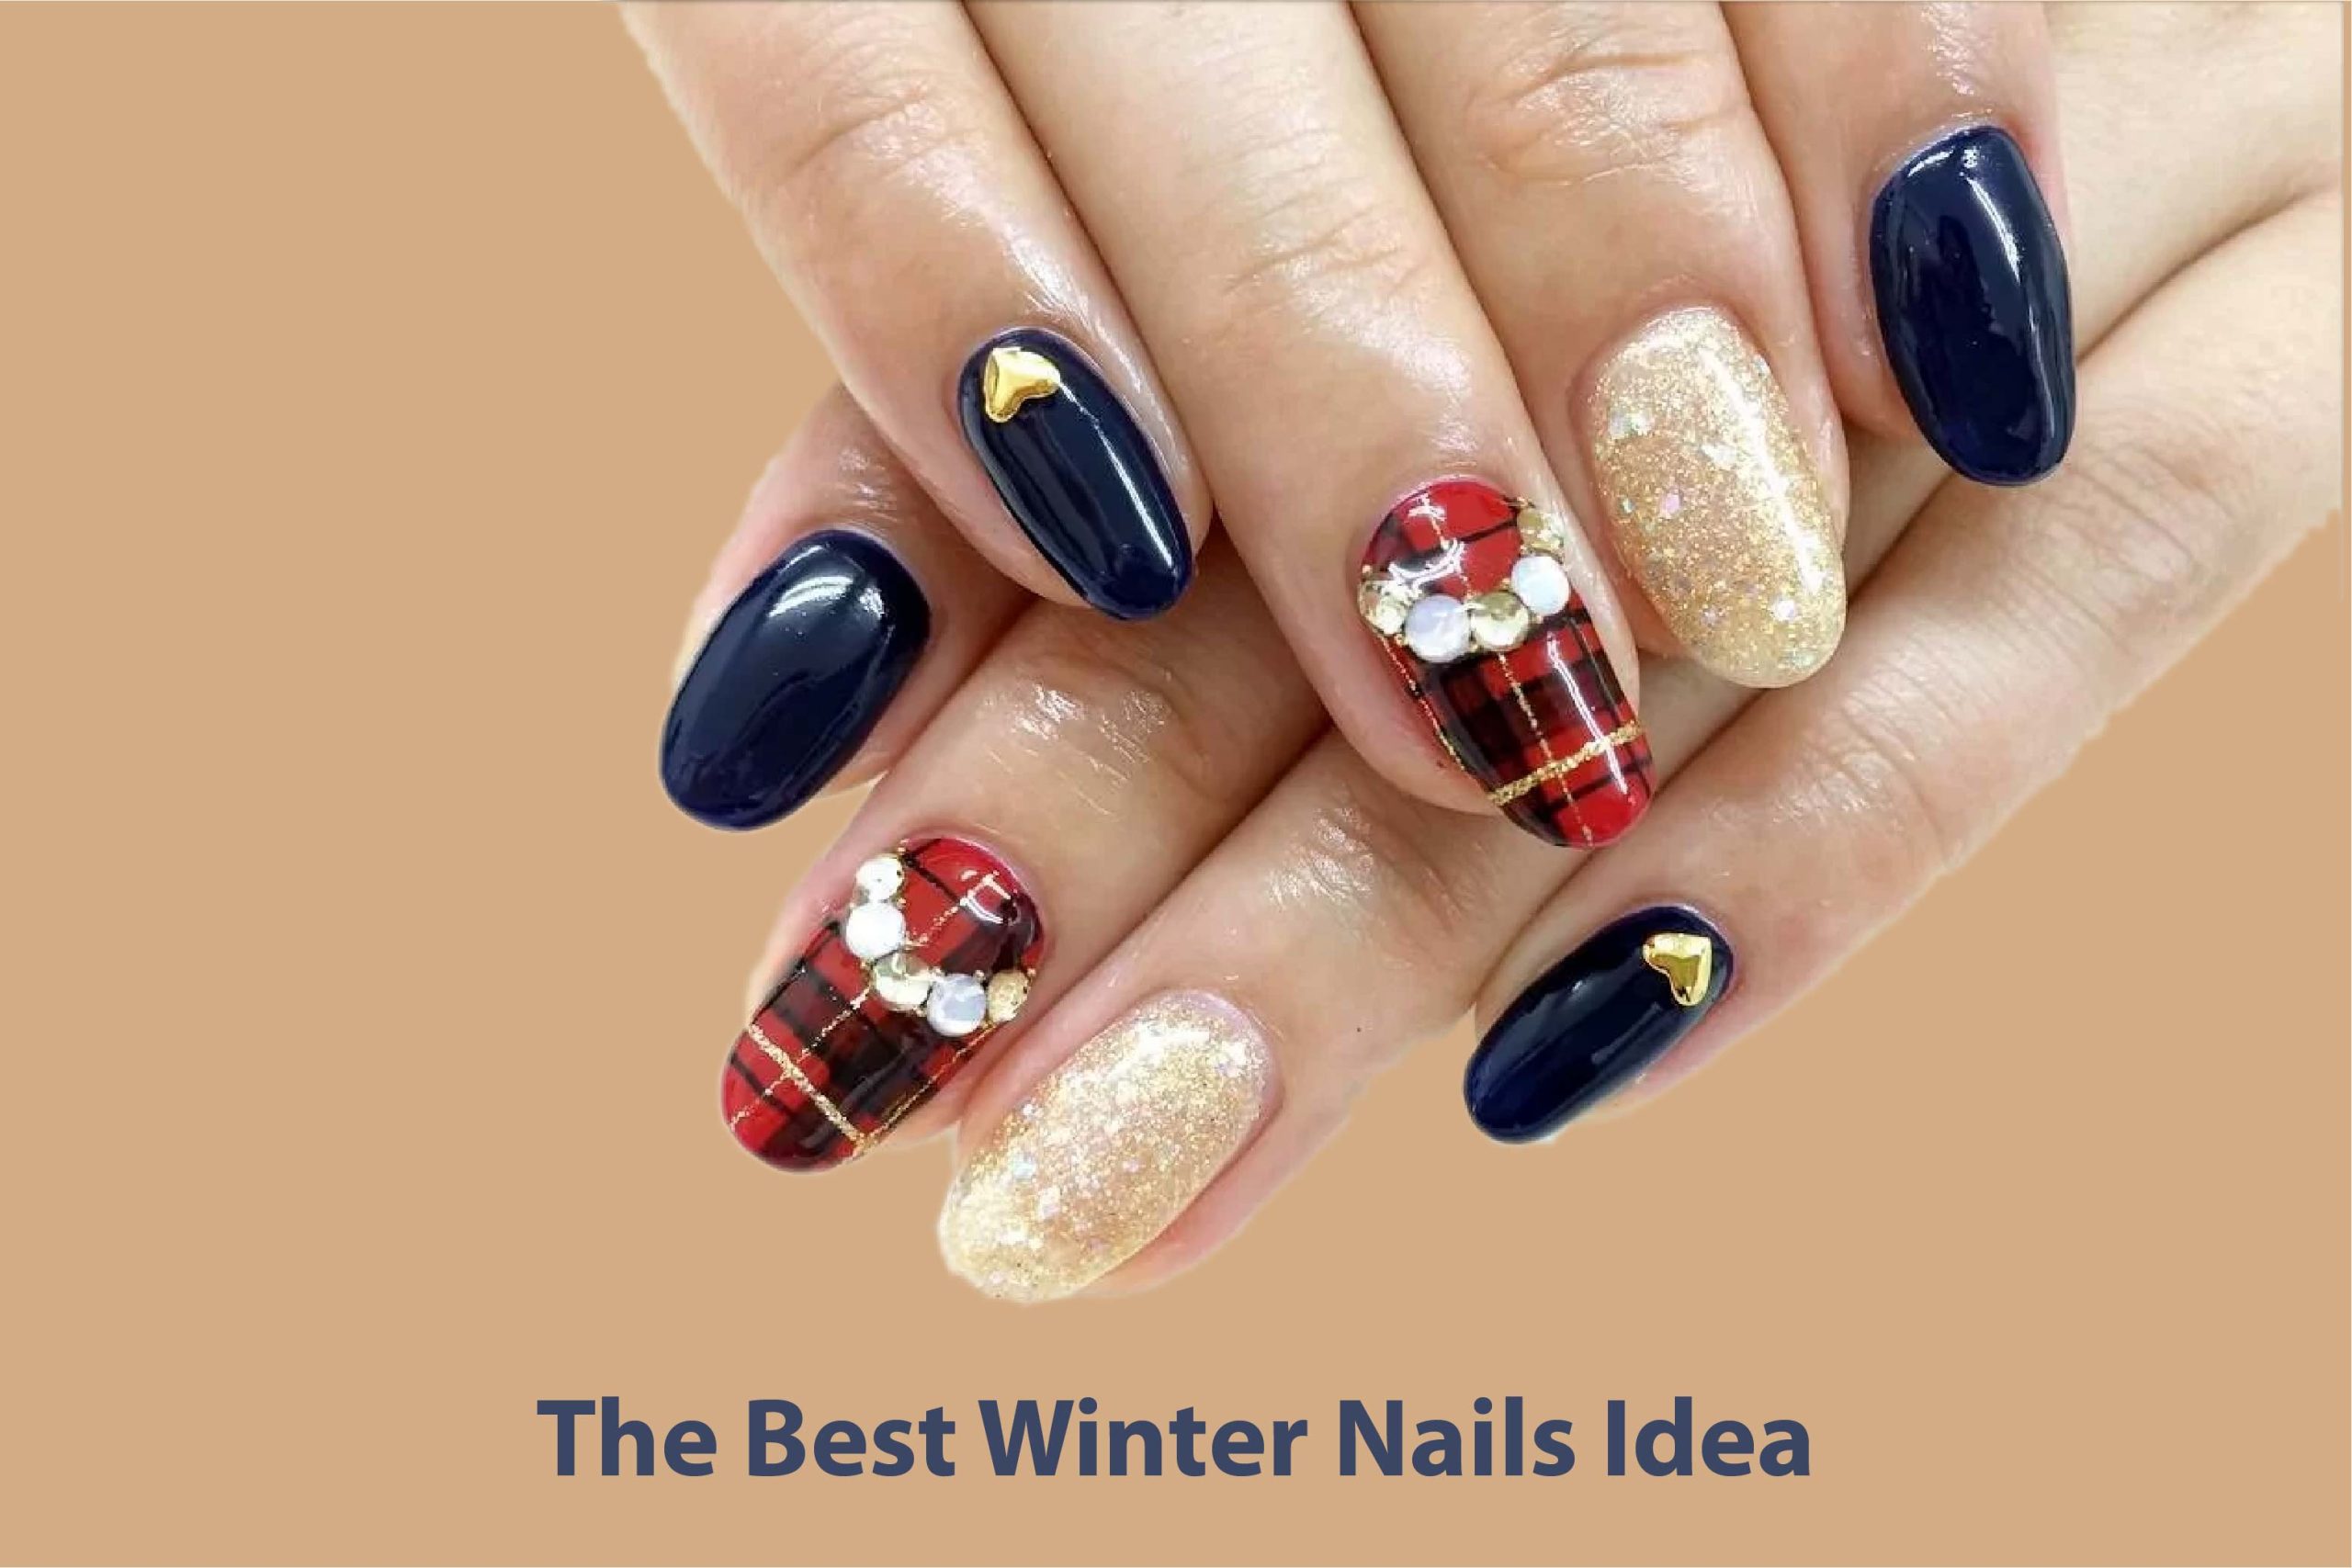 The Best Winter Nails Idea